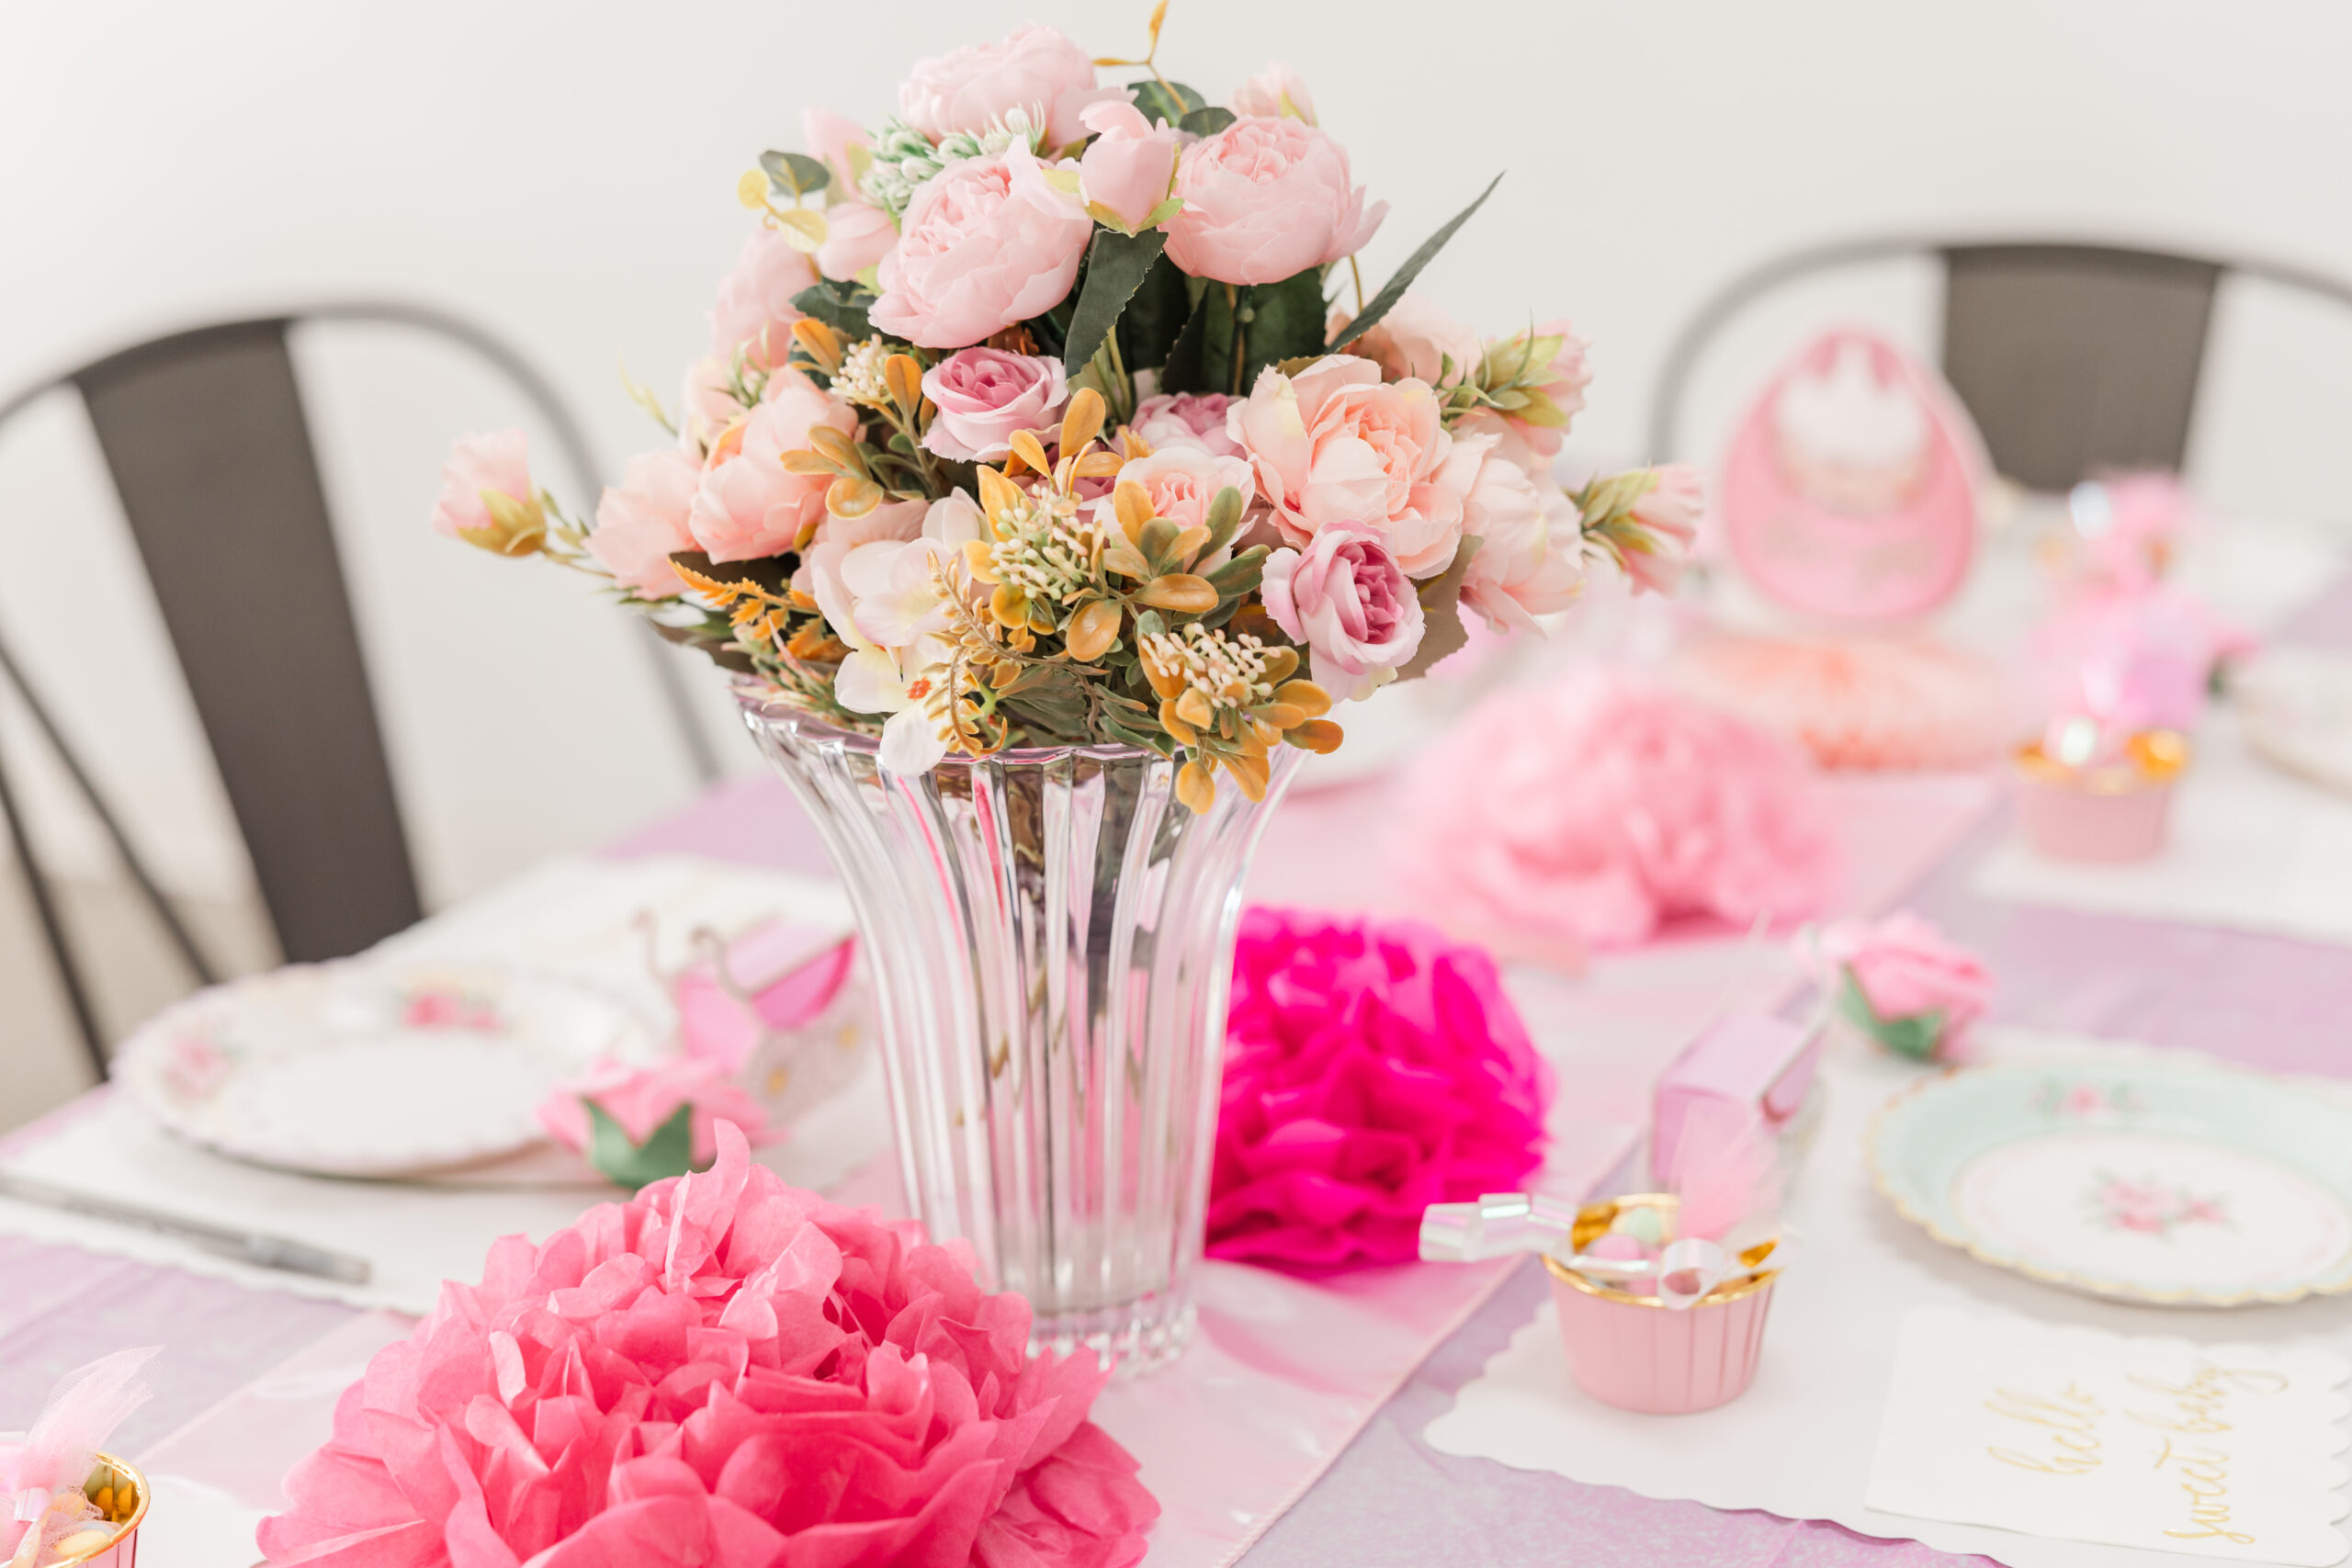 Baby Shower, Collective Howell, DIY Event, Michigan, Baby Girl, Table Scape, Party Decor, Garden Party